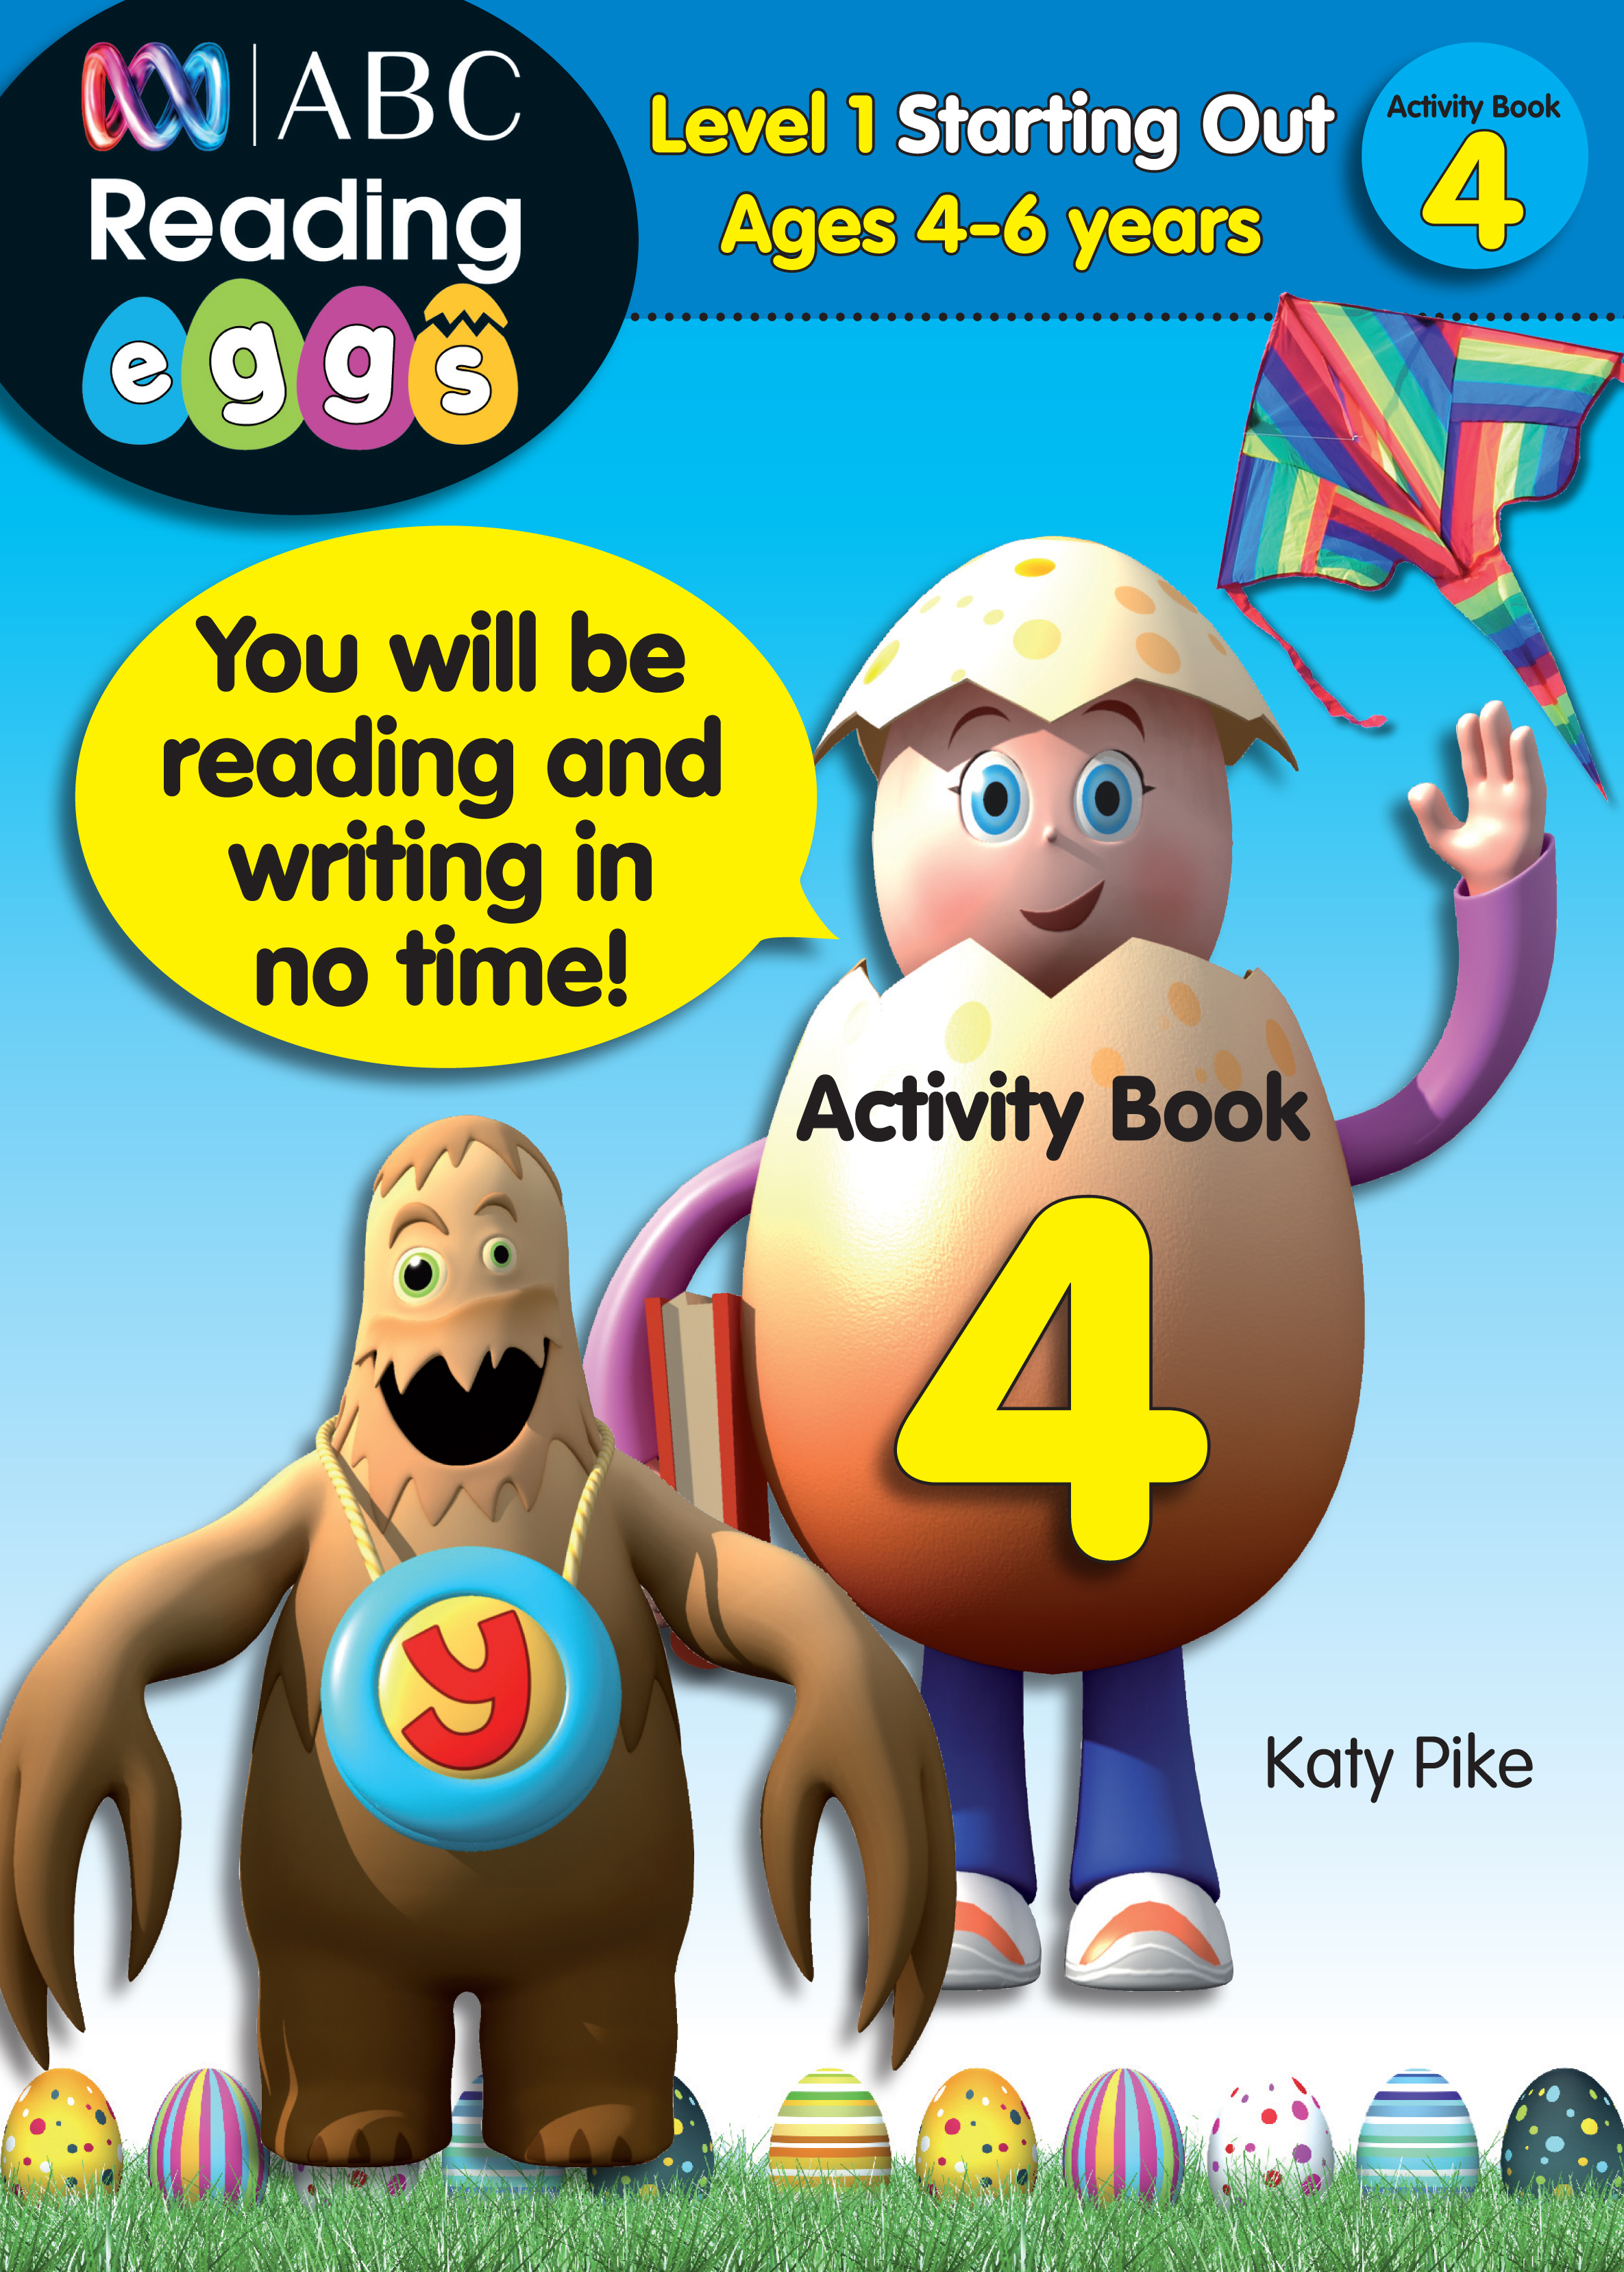 Picture of ABC Reading Eggs Level 1 Starting Out Activity Book 4 Ages 4-6